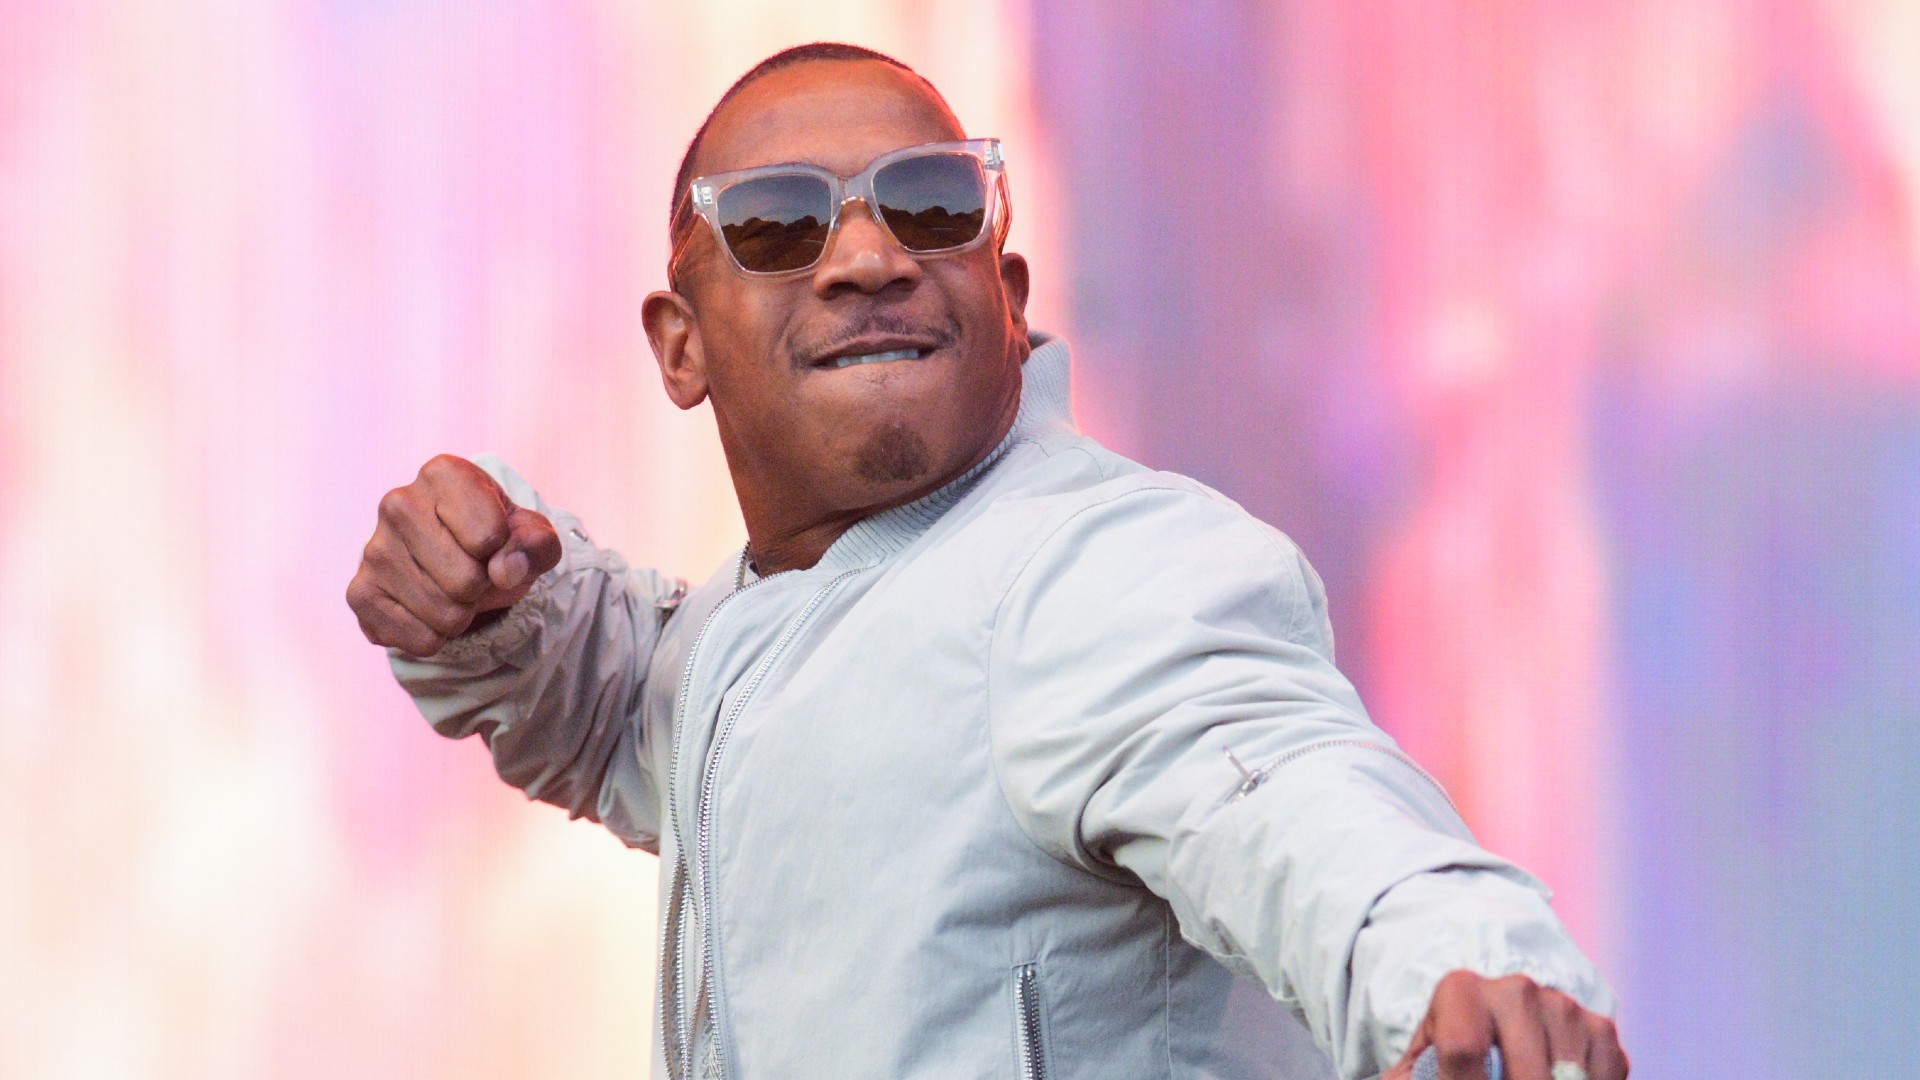 Ja Rule Defends His Rap Legacy After Being Left Off ‘Top 50 Greatest Rappers’ List